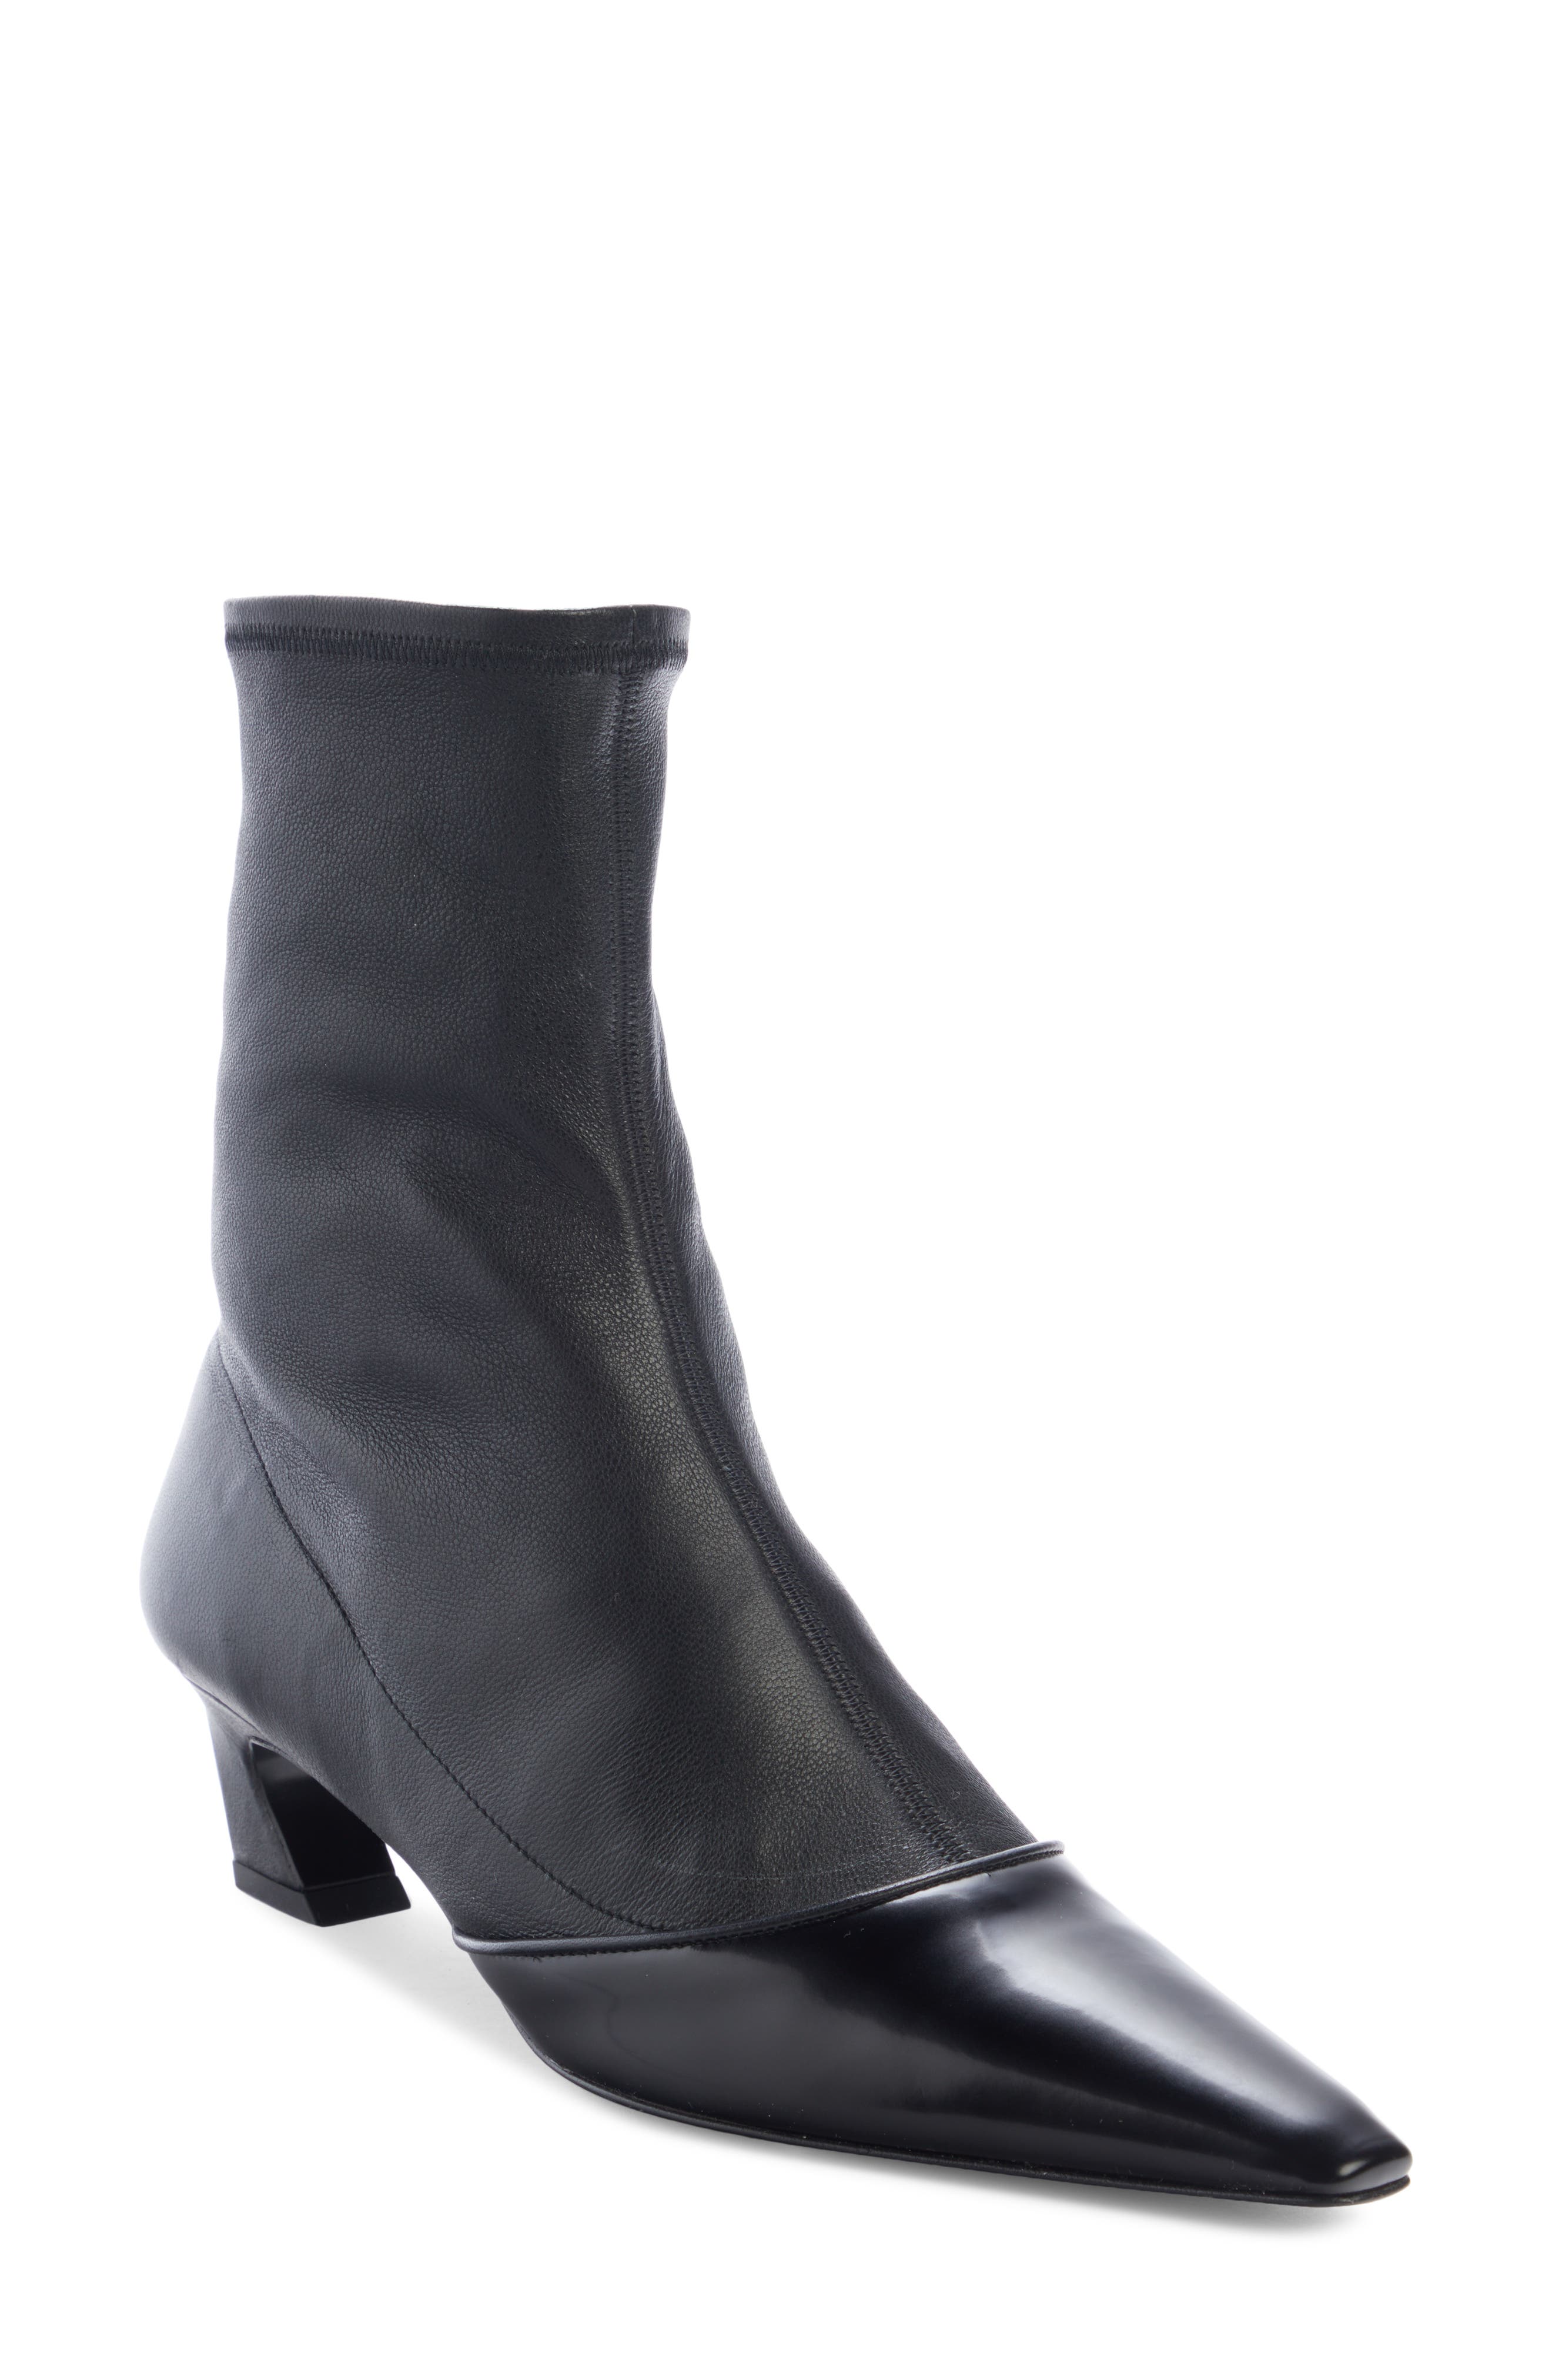 Acne Studios branded ankle boots - Black